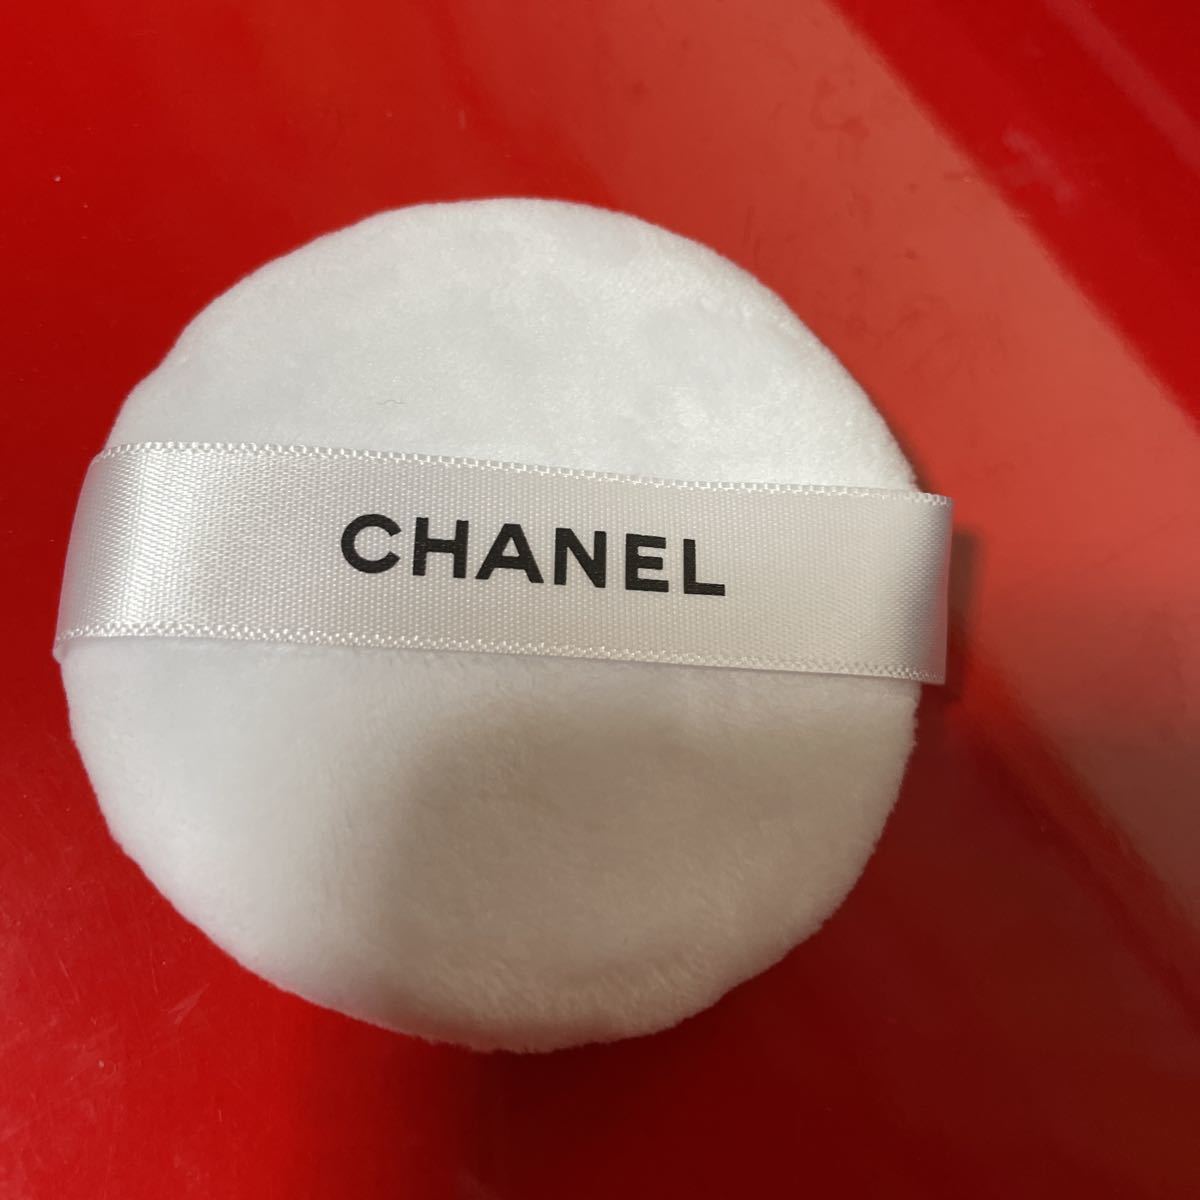  Chanel CHANEL Pooh duru Uni veru cell Lee bruN face powder attached. puff new goods prompt decision 